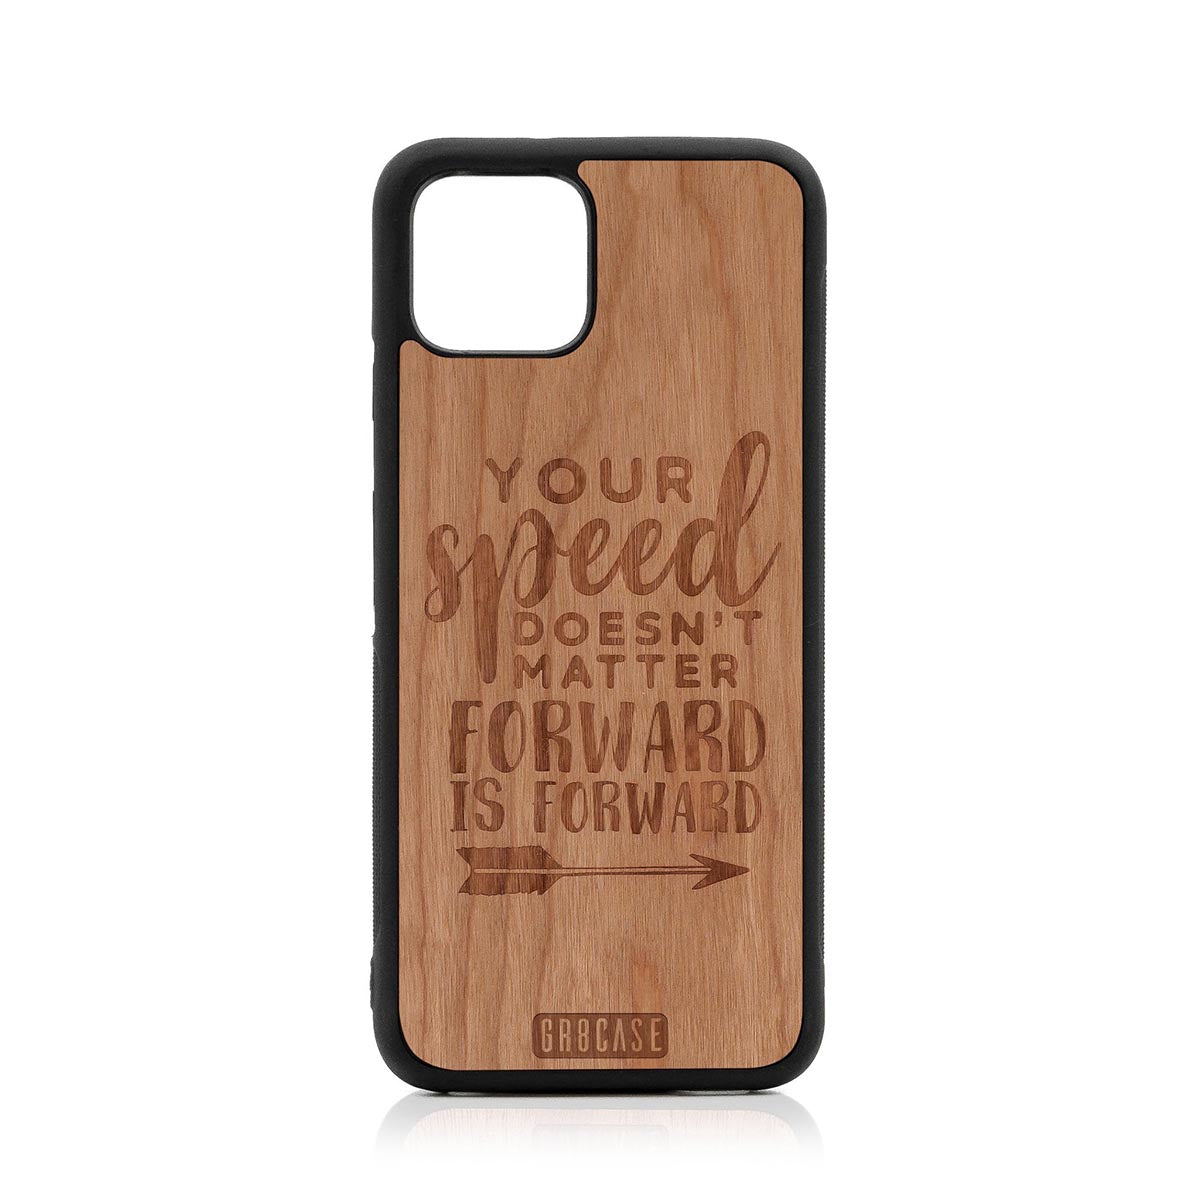 Your Speed Doesn't Matter Forward Is Forward Design Wood Case Google Pixel 4